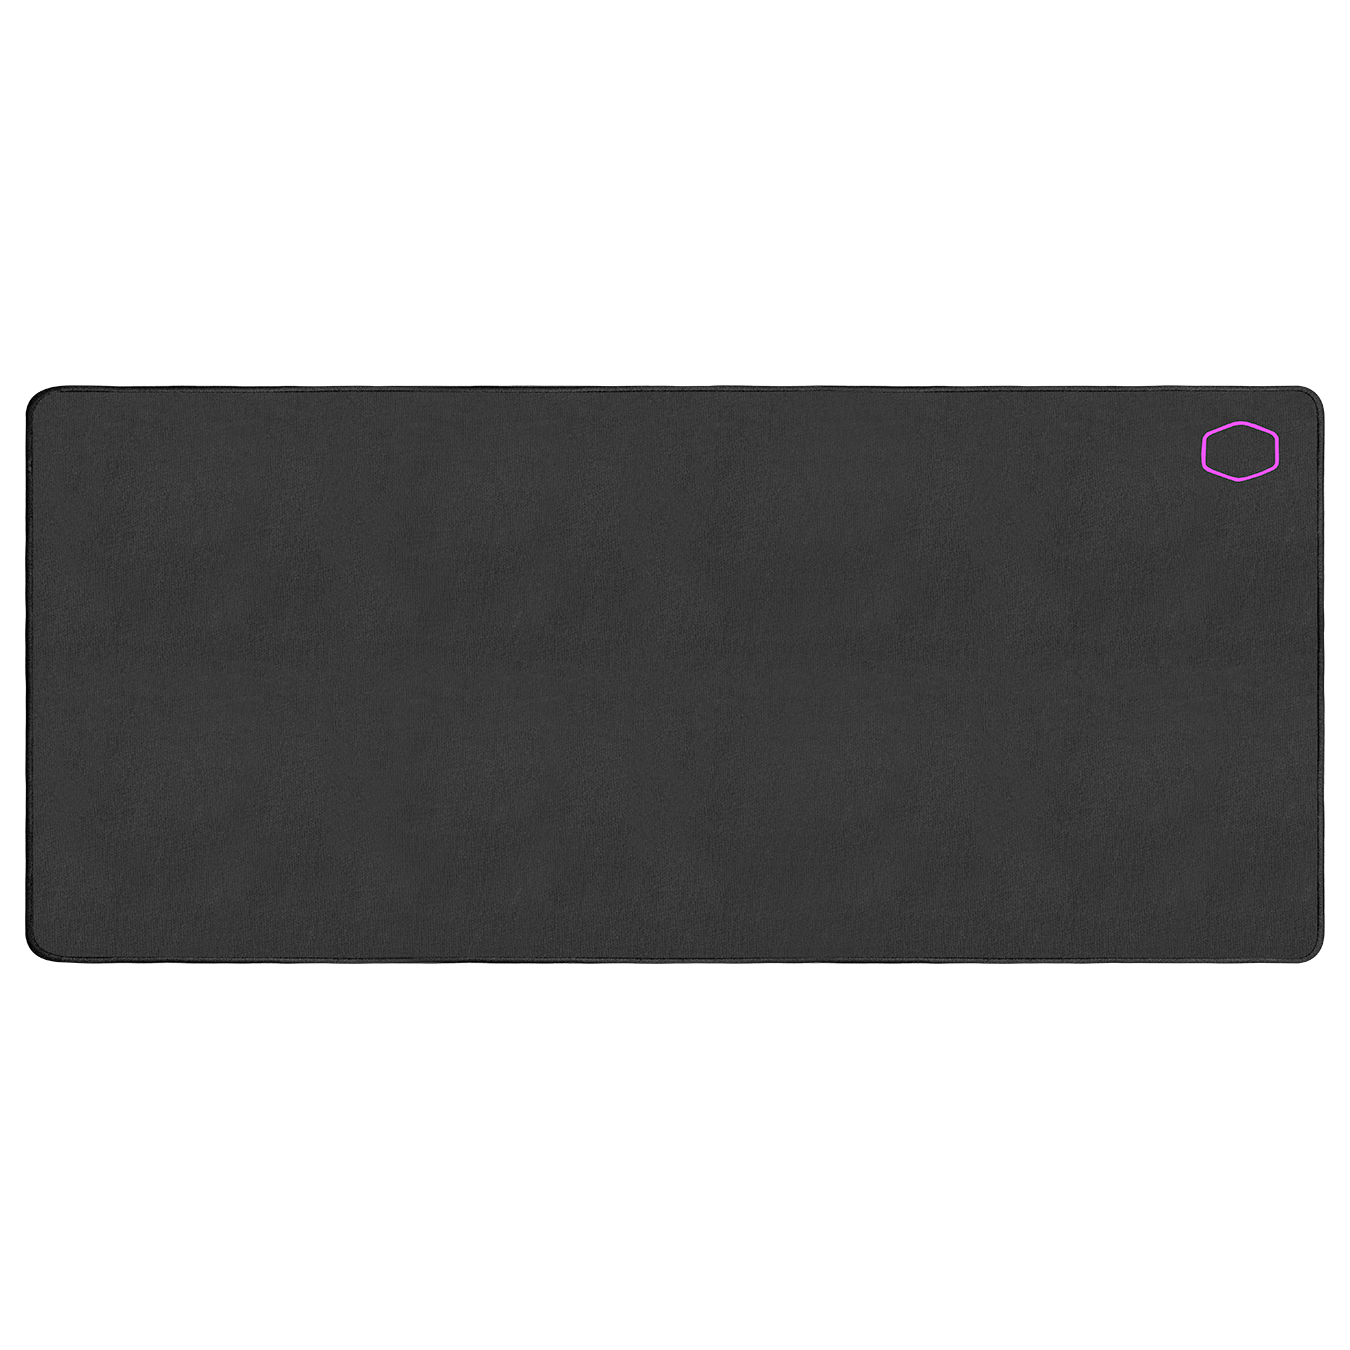 Cooler Master MP511 Gaming Mouse Pad Pre Premium Quality, Flawless Victory